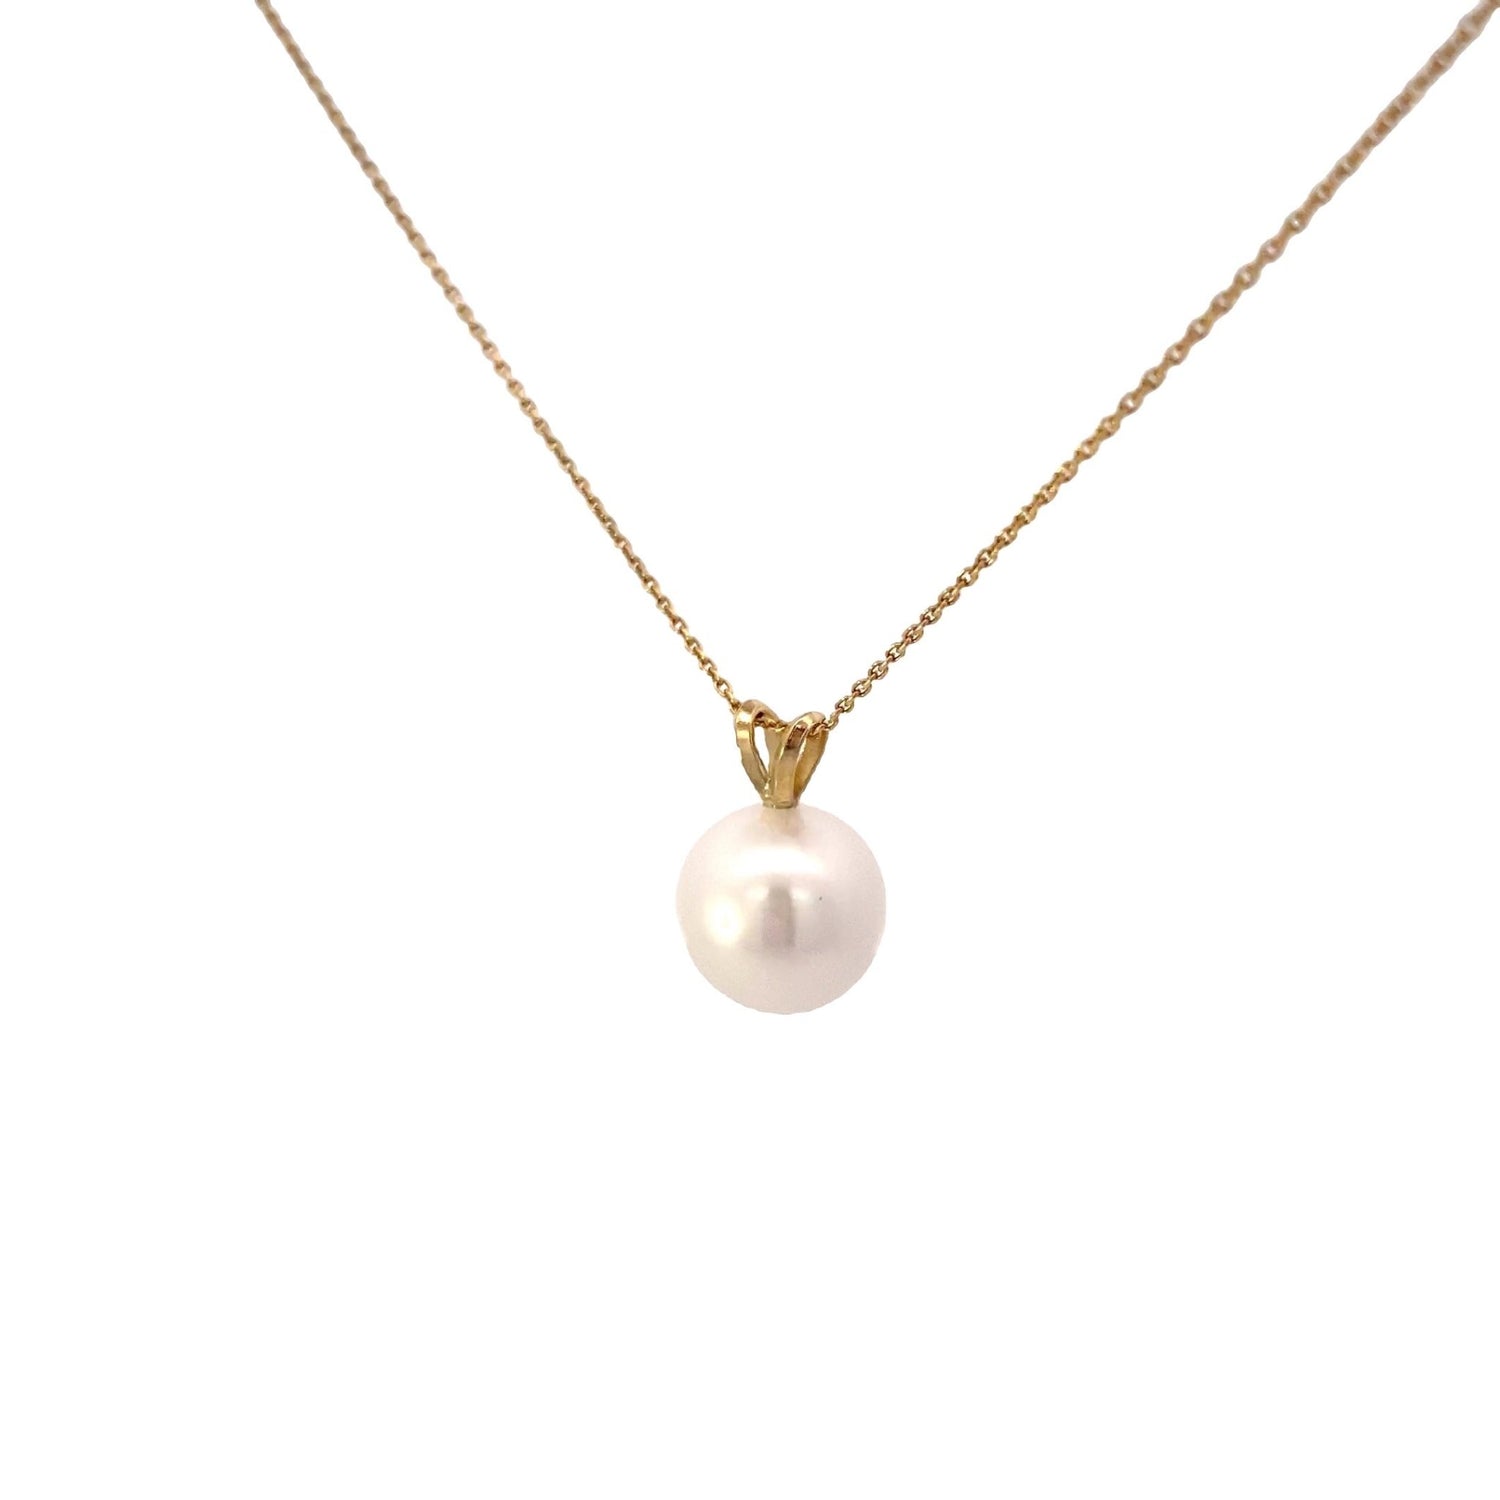 Necklace- Yellow Gold chain with fresh water pearl pendant - Gaines Jewelers